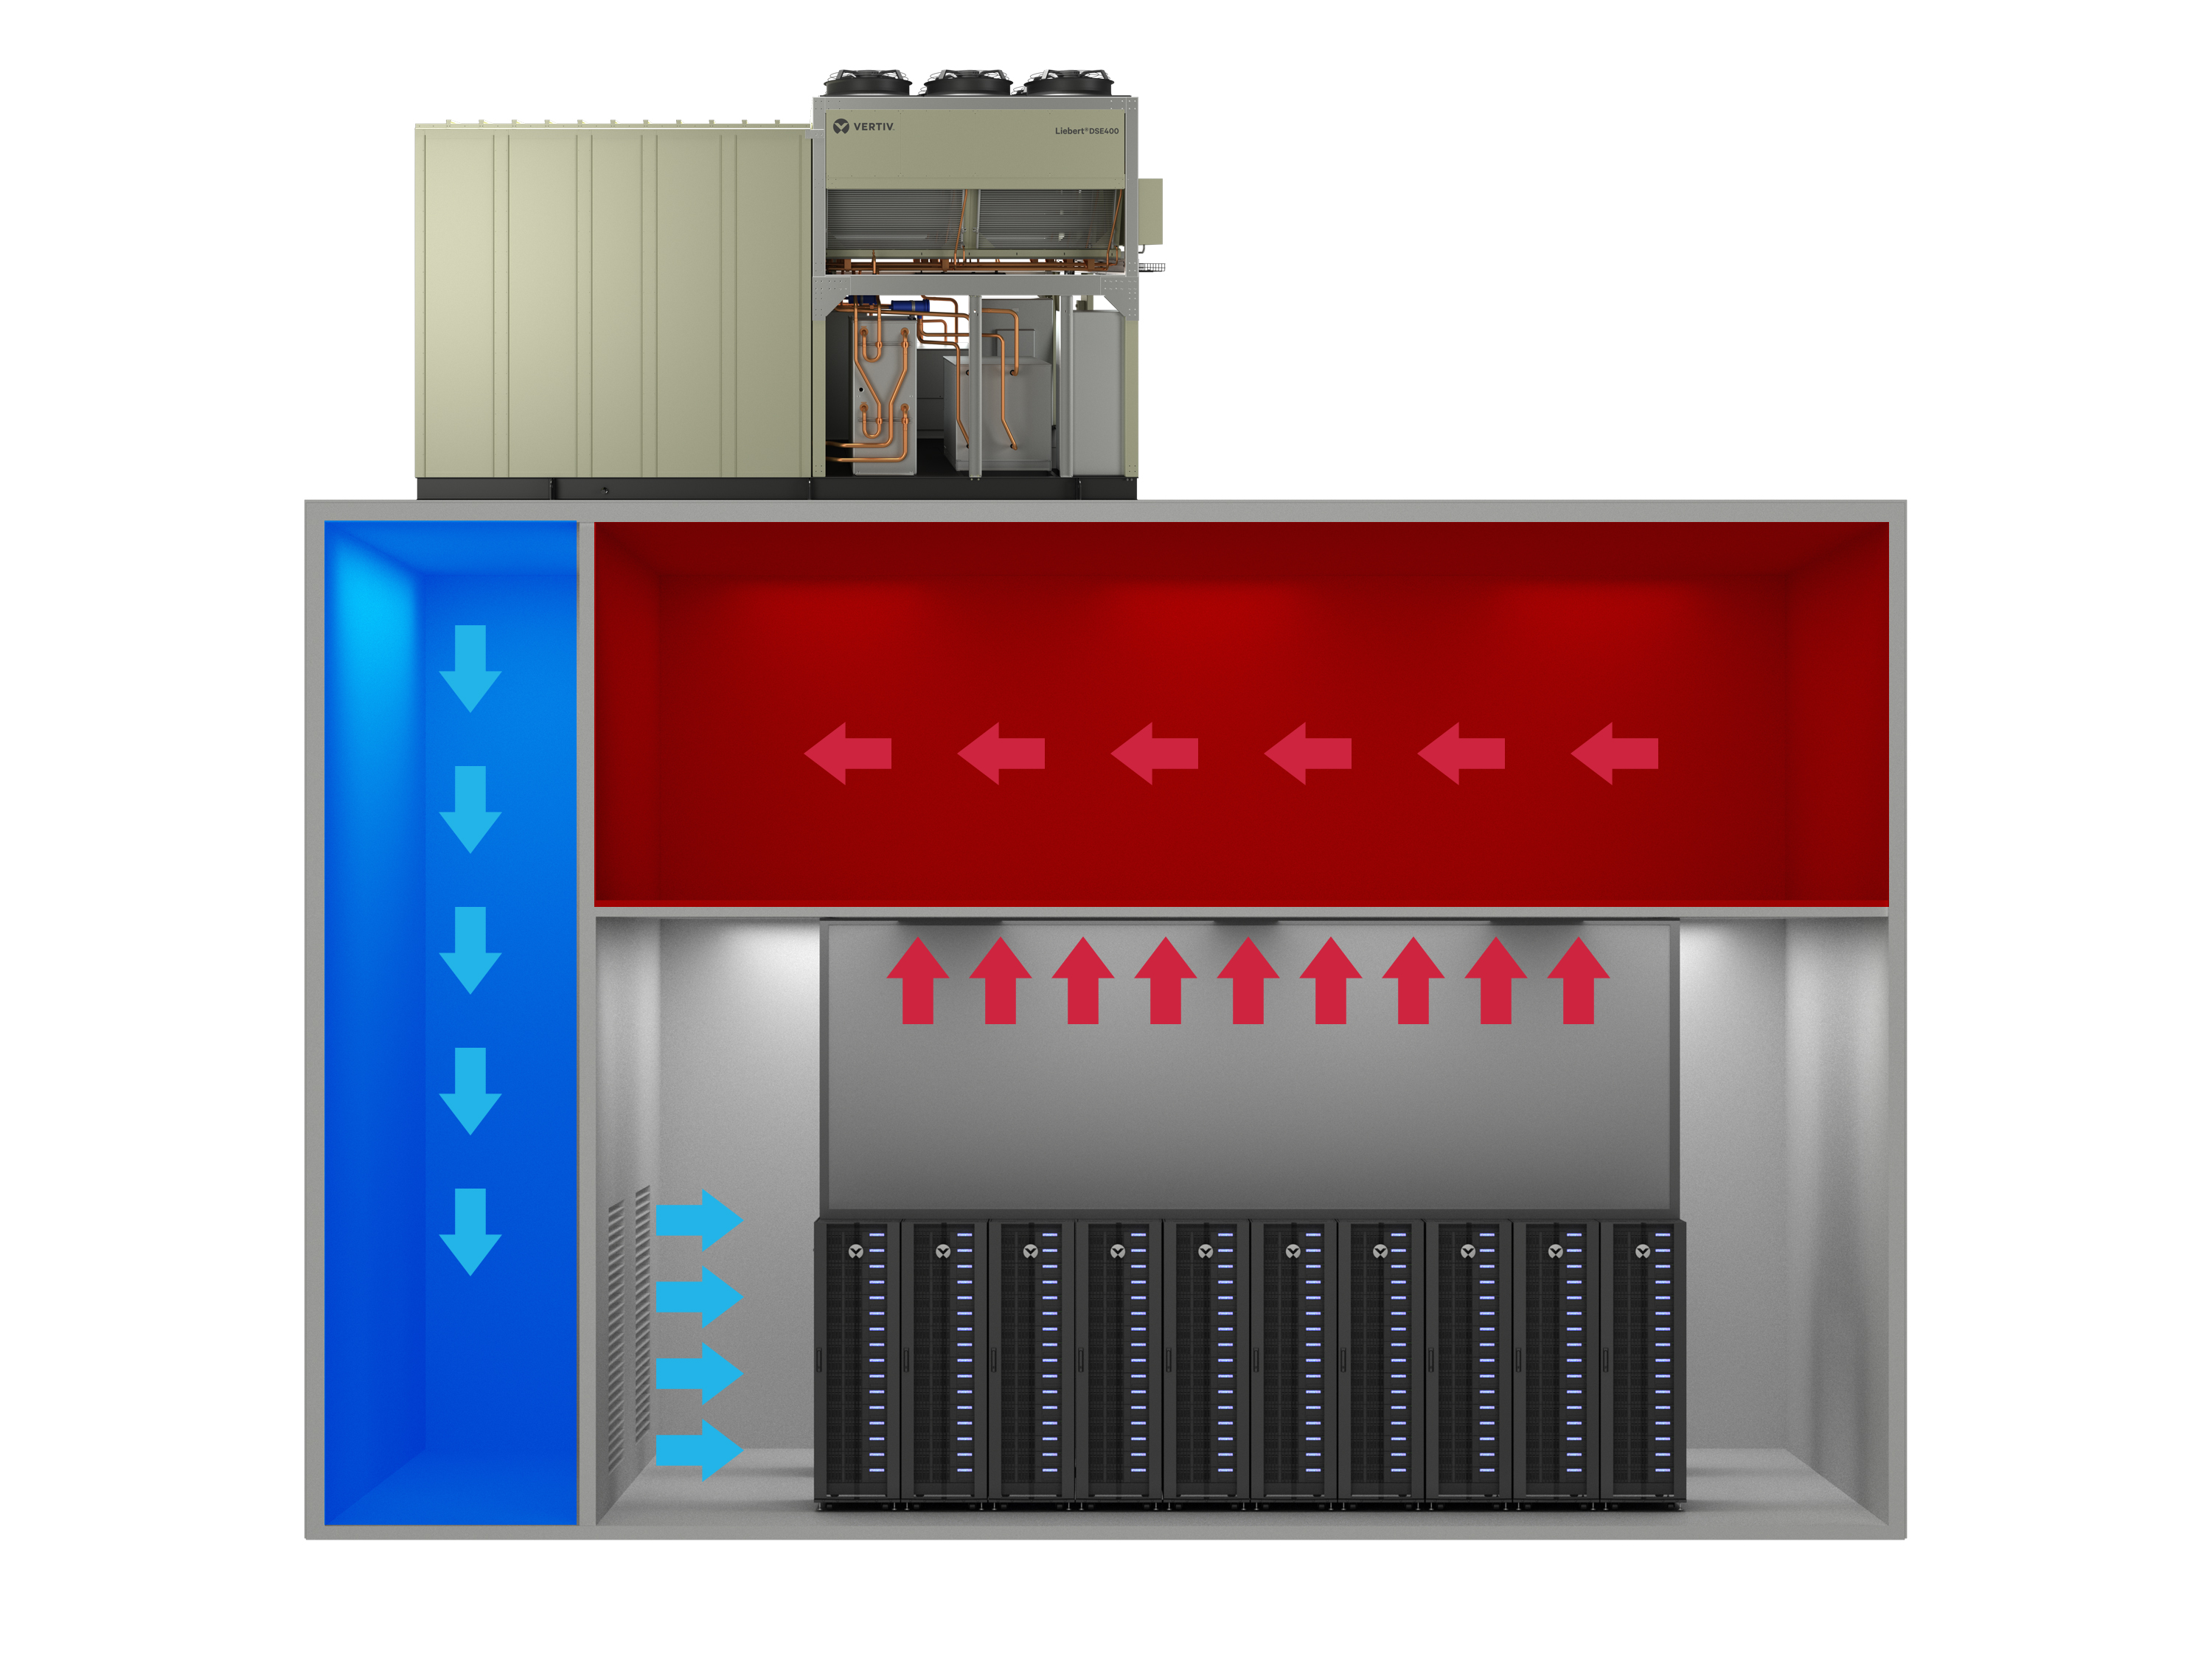 Liebert DSE Packaged Free-Cooling Solution, 400-500kW Draw-Thru Rooftop Configuration Image